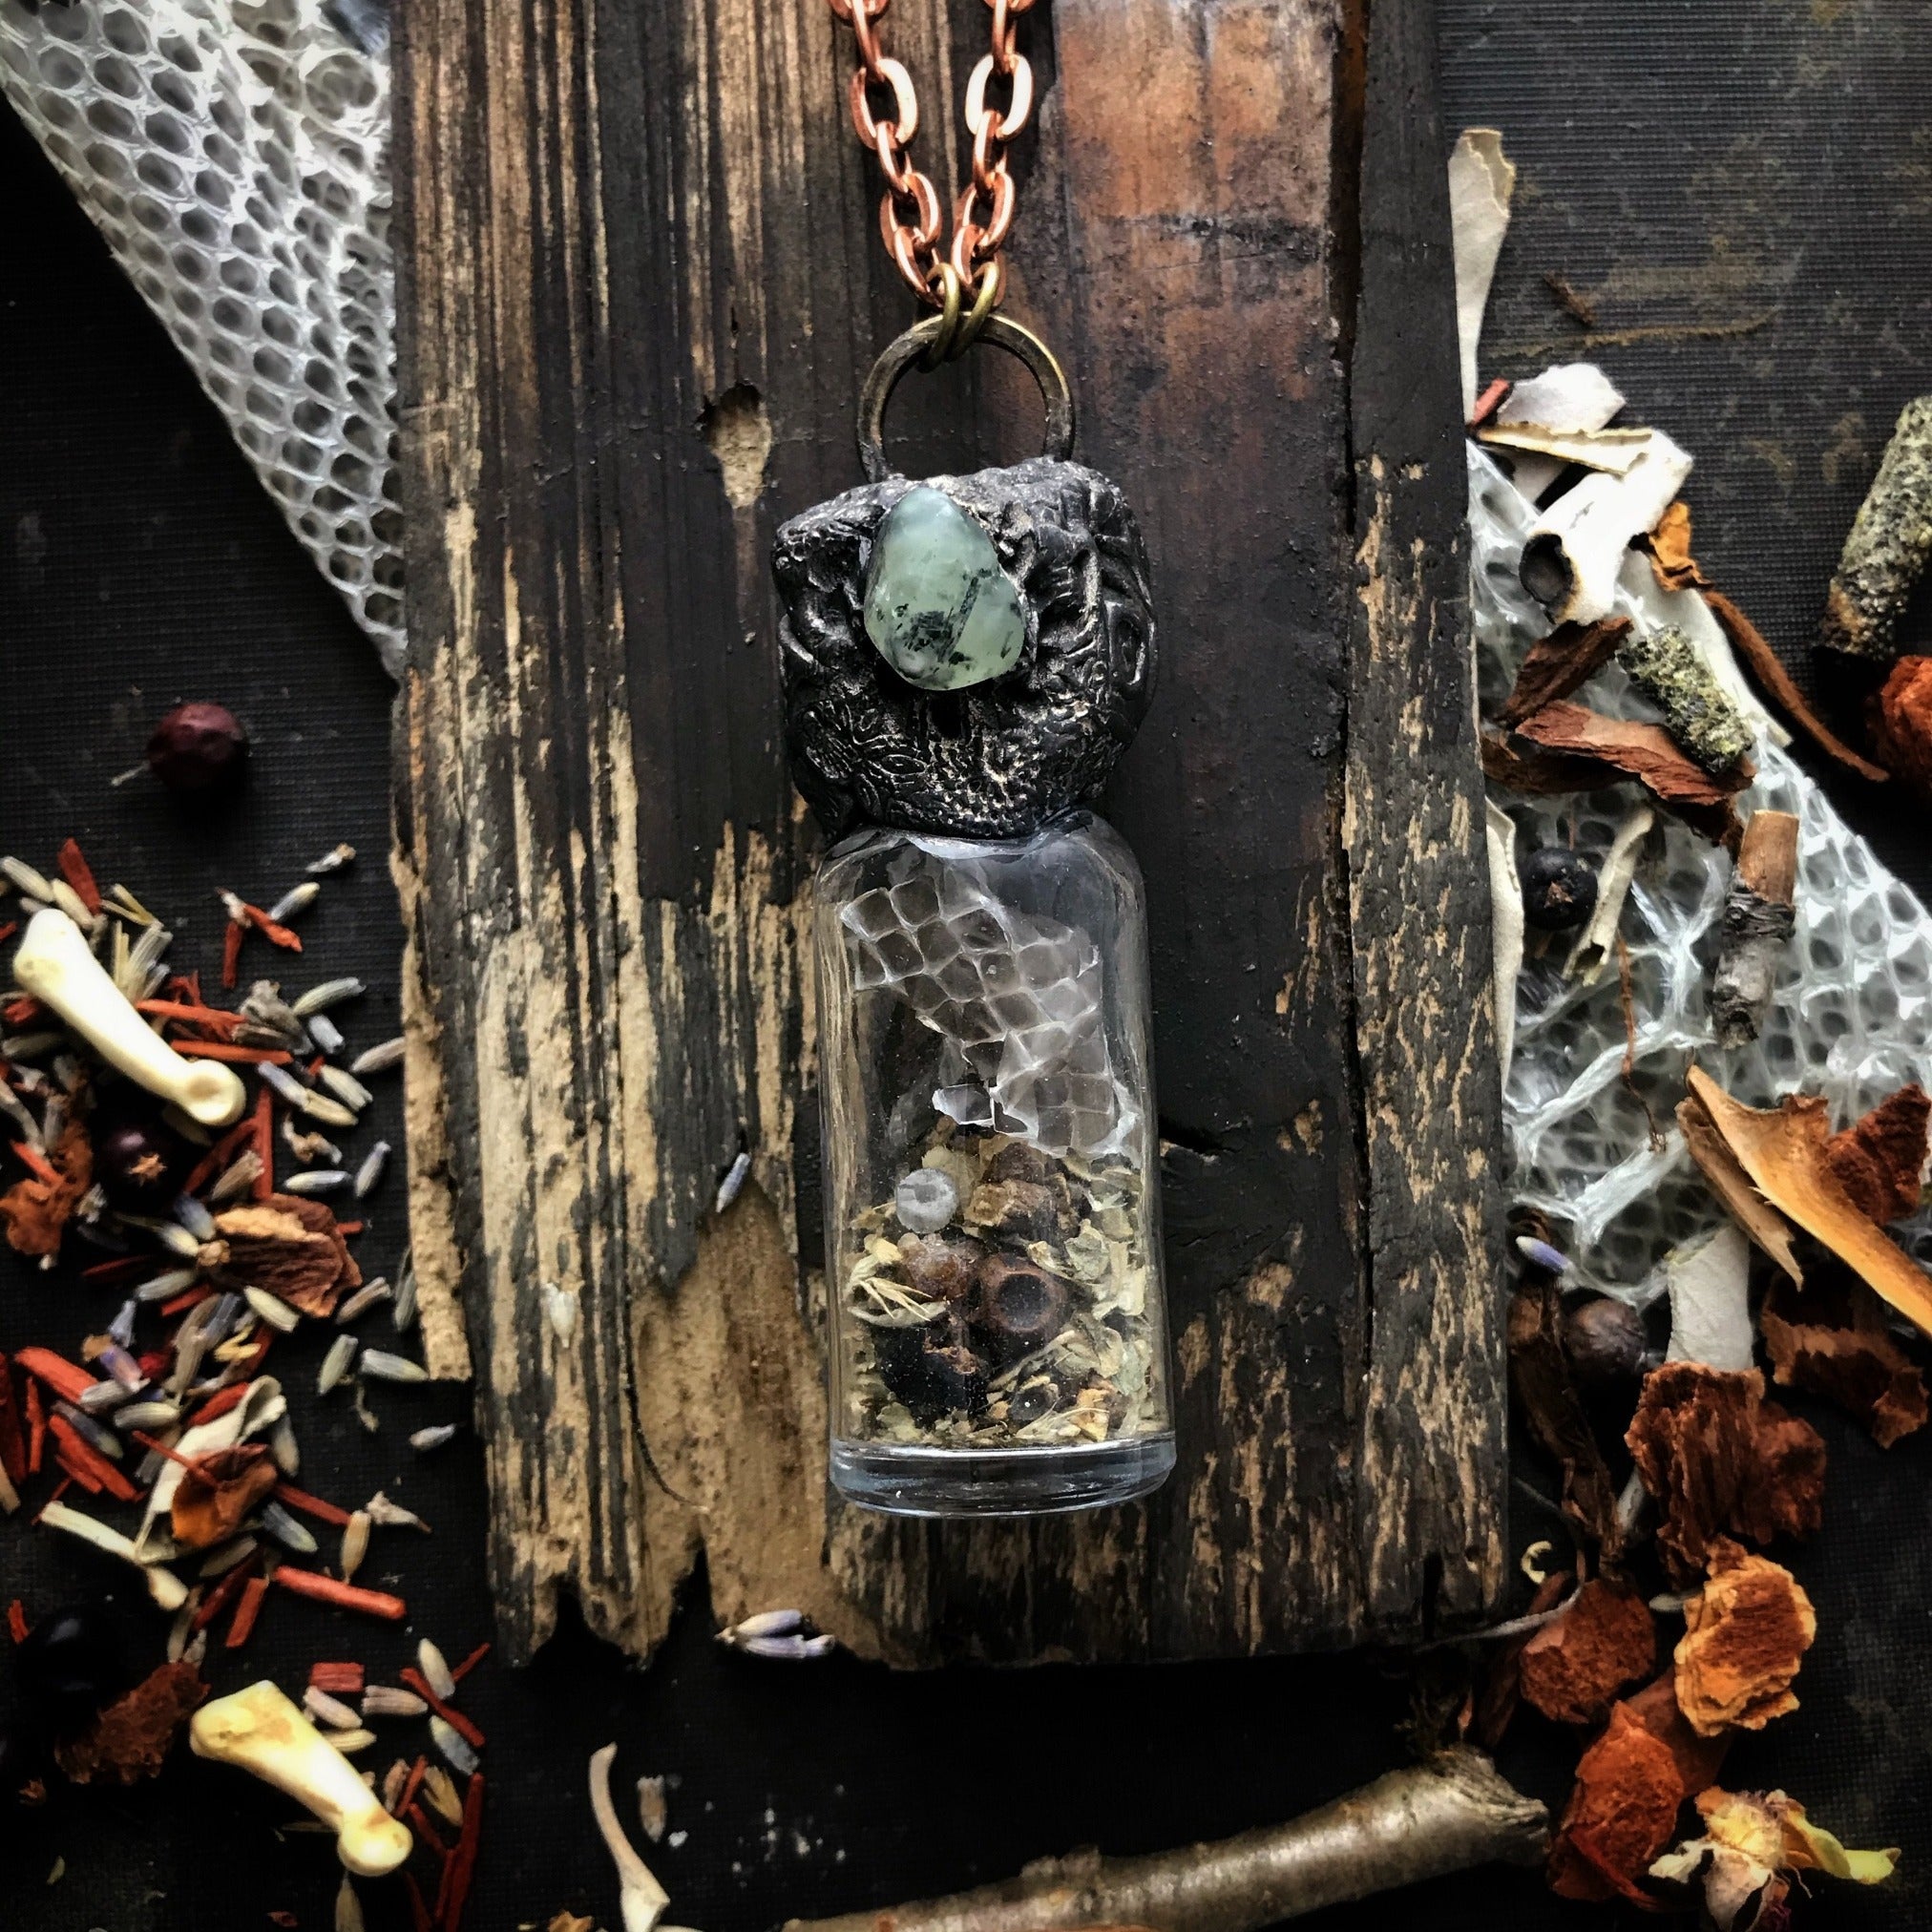 Conjure Necklace for Growth, Change and New Beginnings- With Bones, Snake Skin, Stones + Herbs